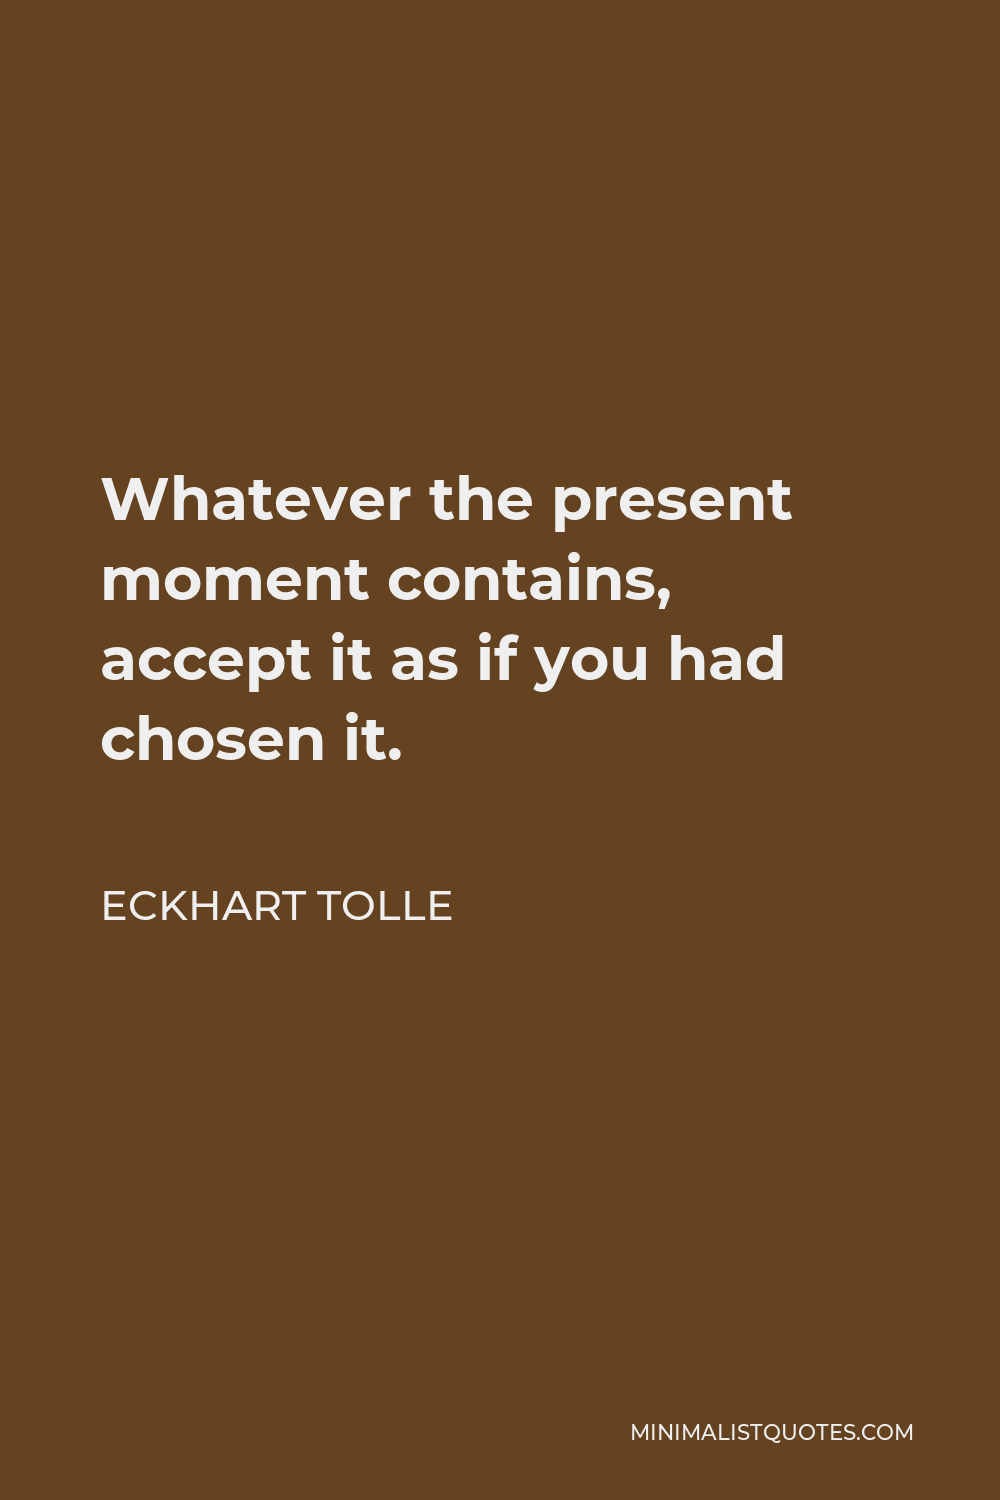 Eckhart Tolle Quote Whatever The Present Moment Contains Accept It As If You Had Chosen It